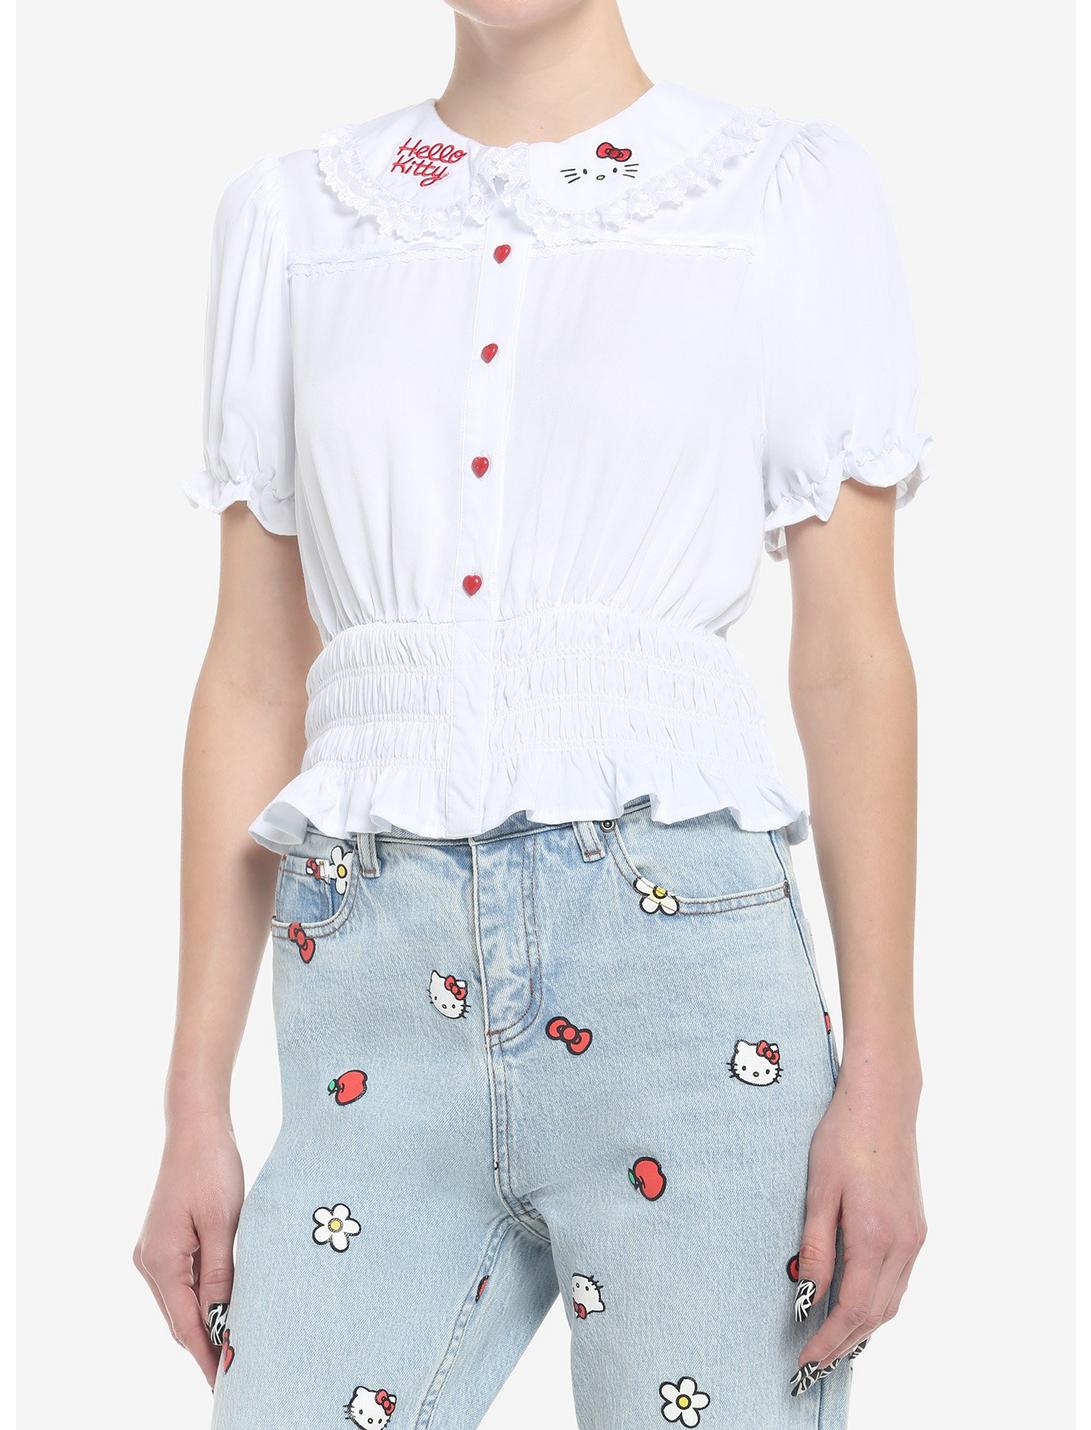 Hello Kitty Lace Woven Button-Up Top Plus Size, BRIGHT WHITE, hi-res